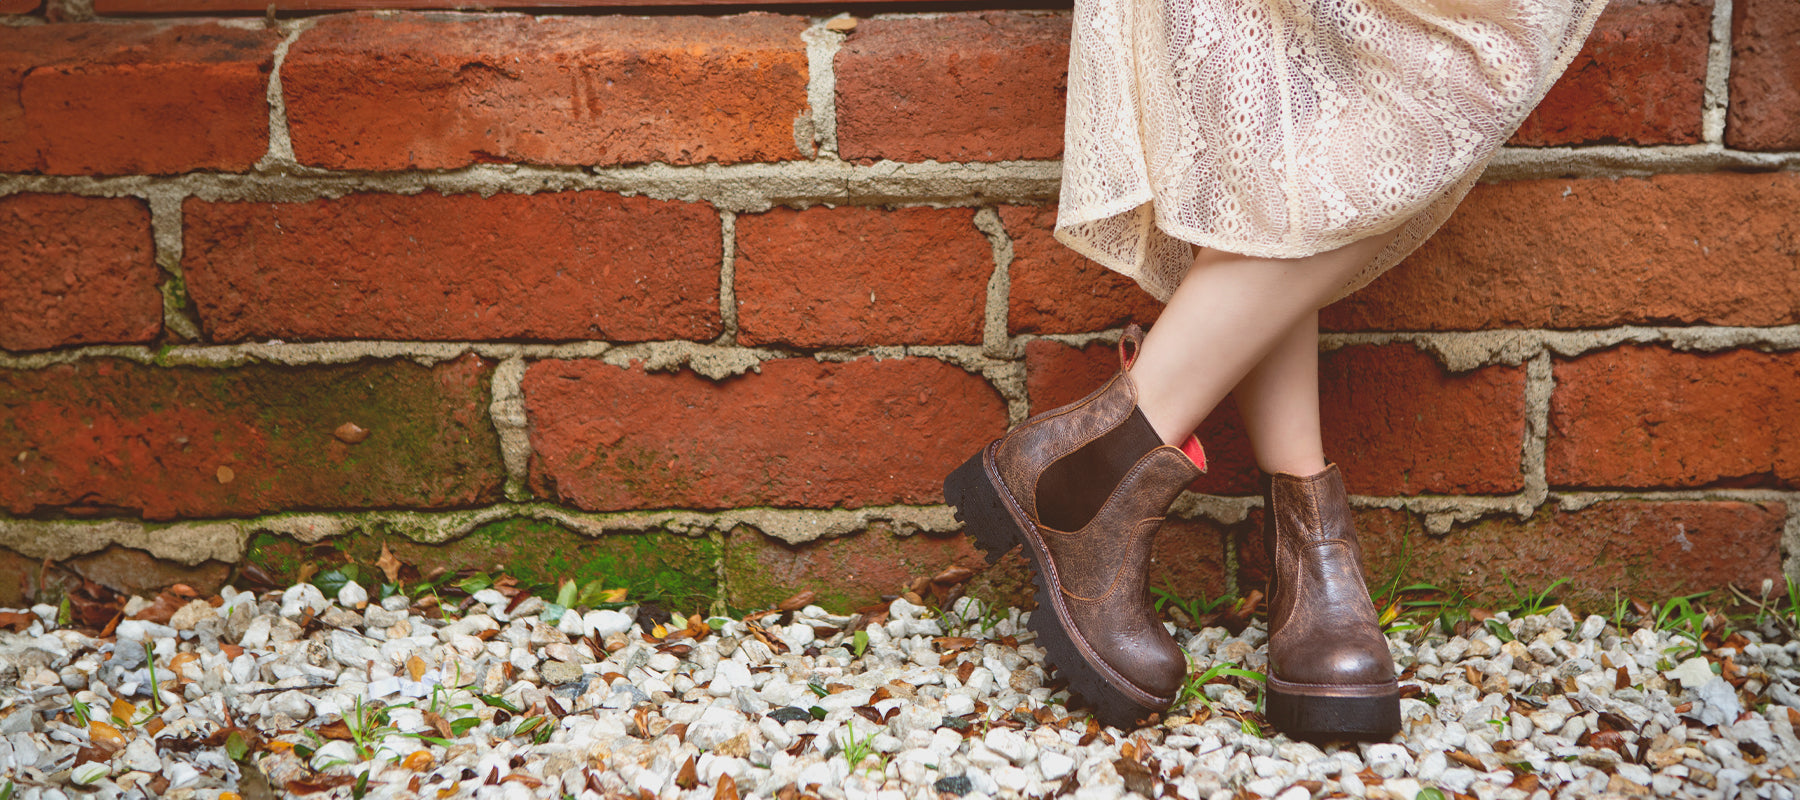 Person leaning against a brick wall wearing brown boots and a lace dress.